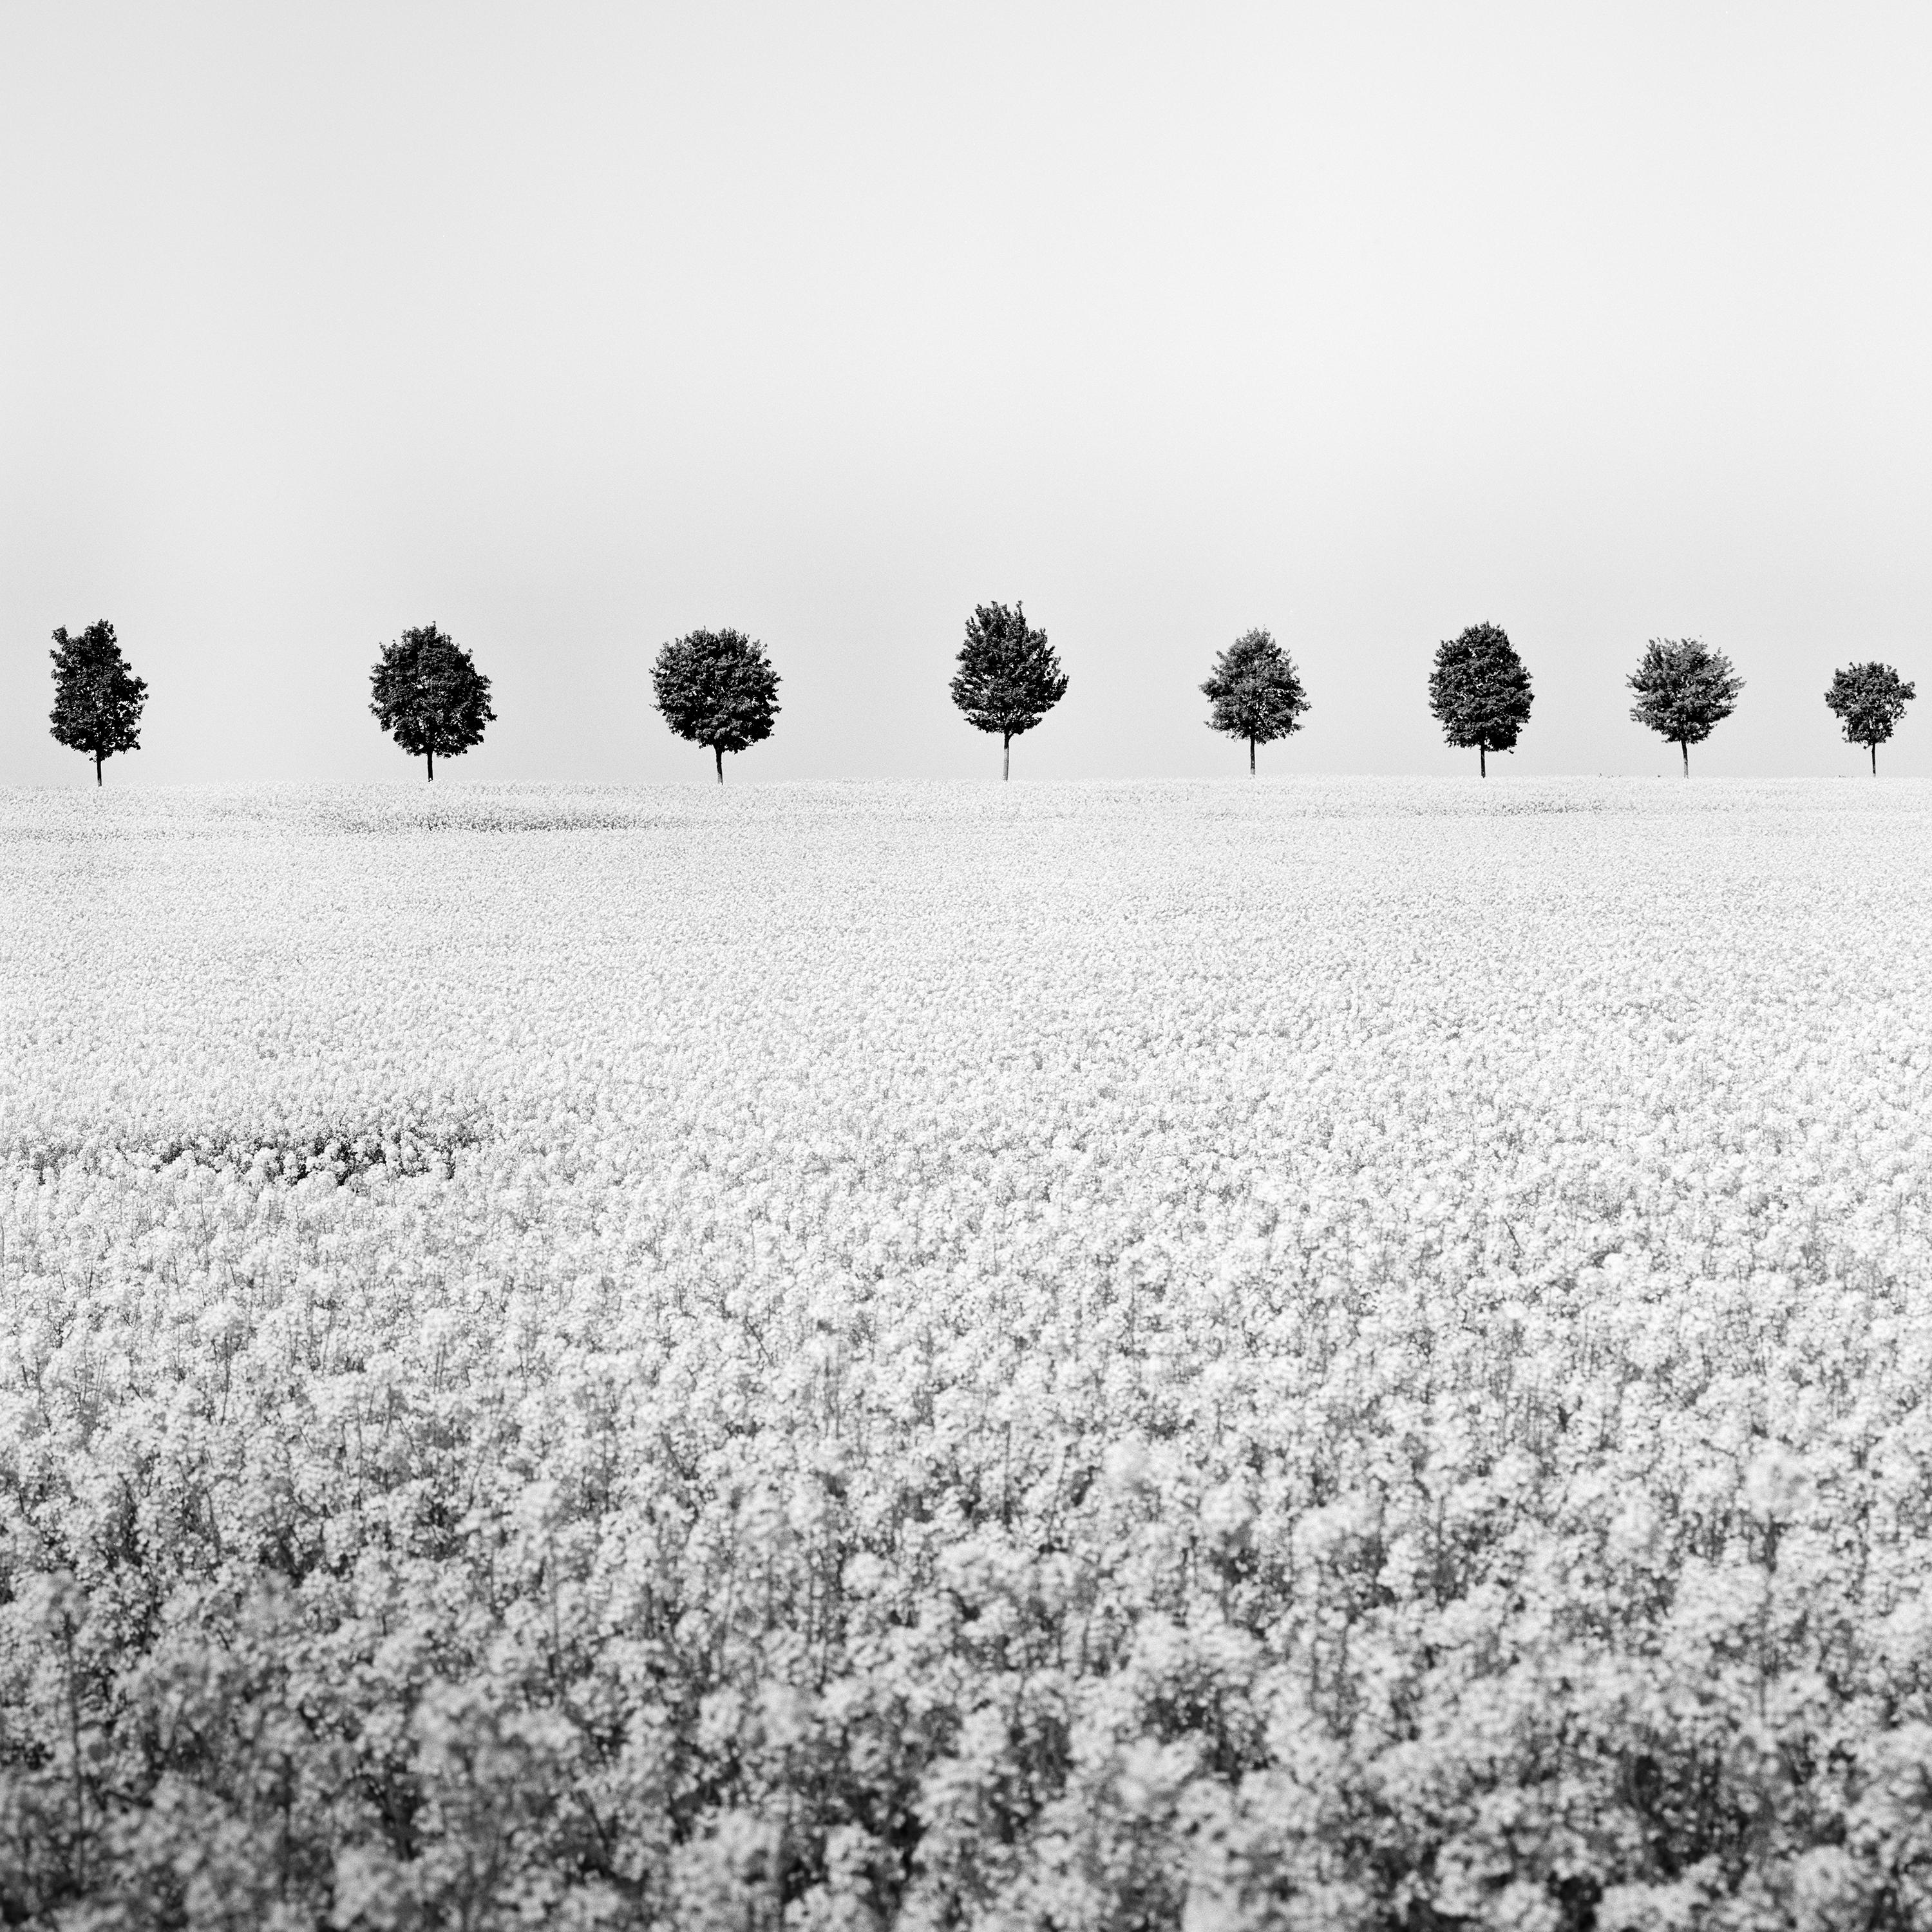 Brassica Napus row of trees black white minimalist landscape fineart photography For Sale 3